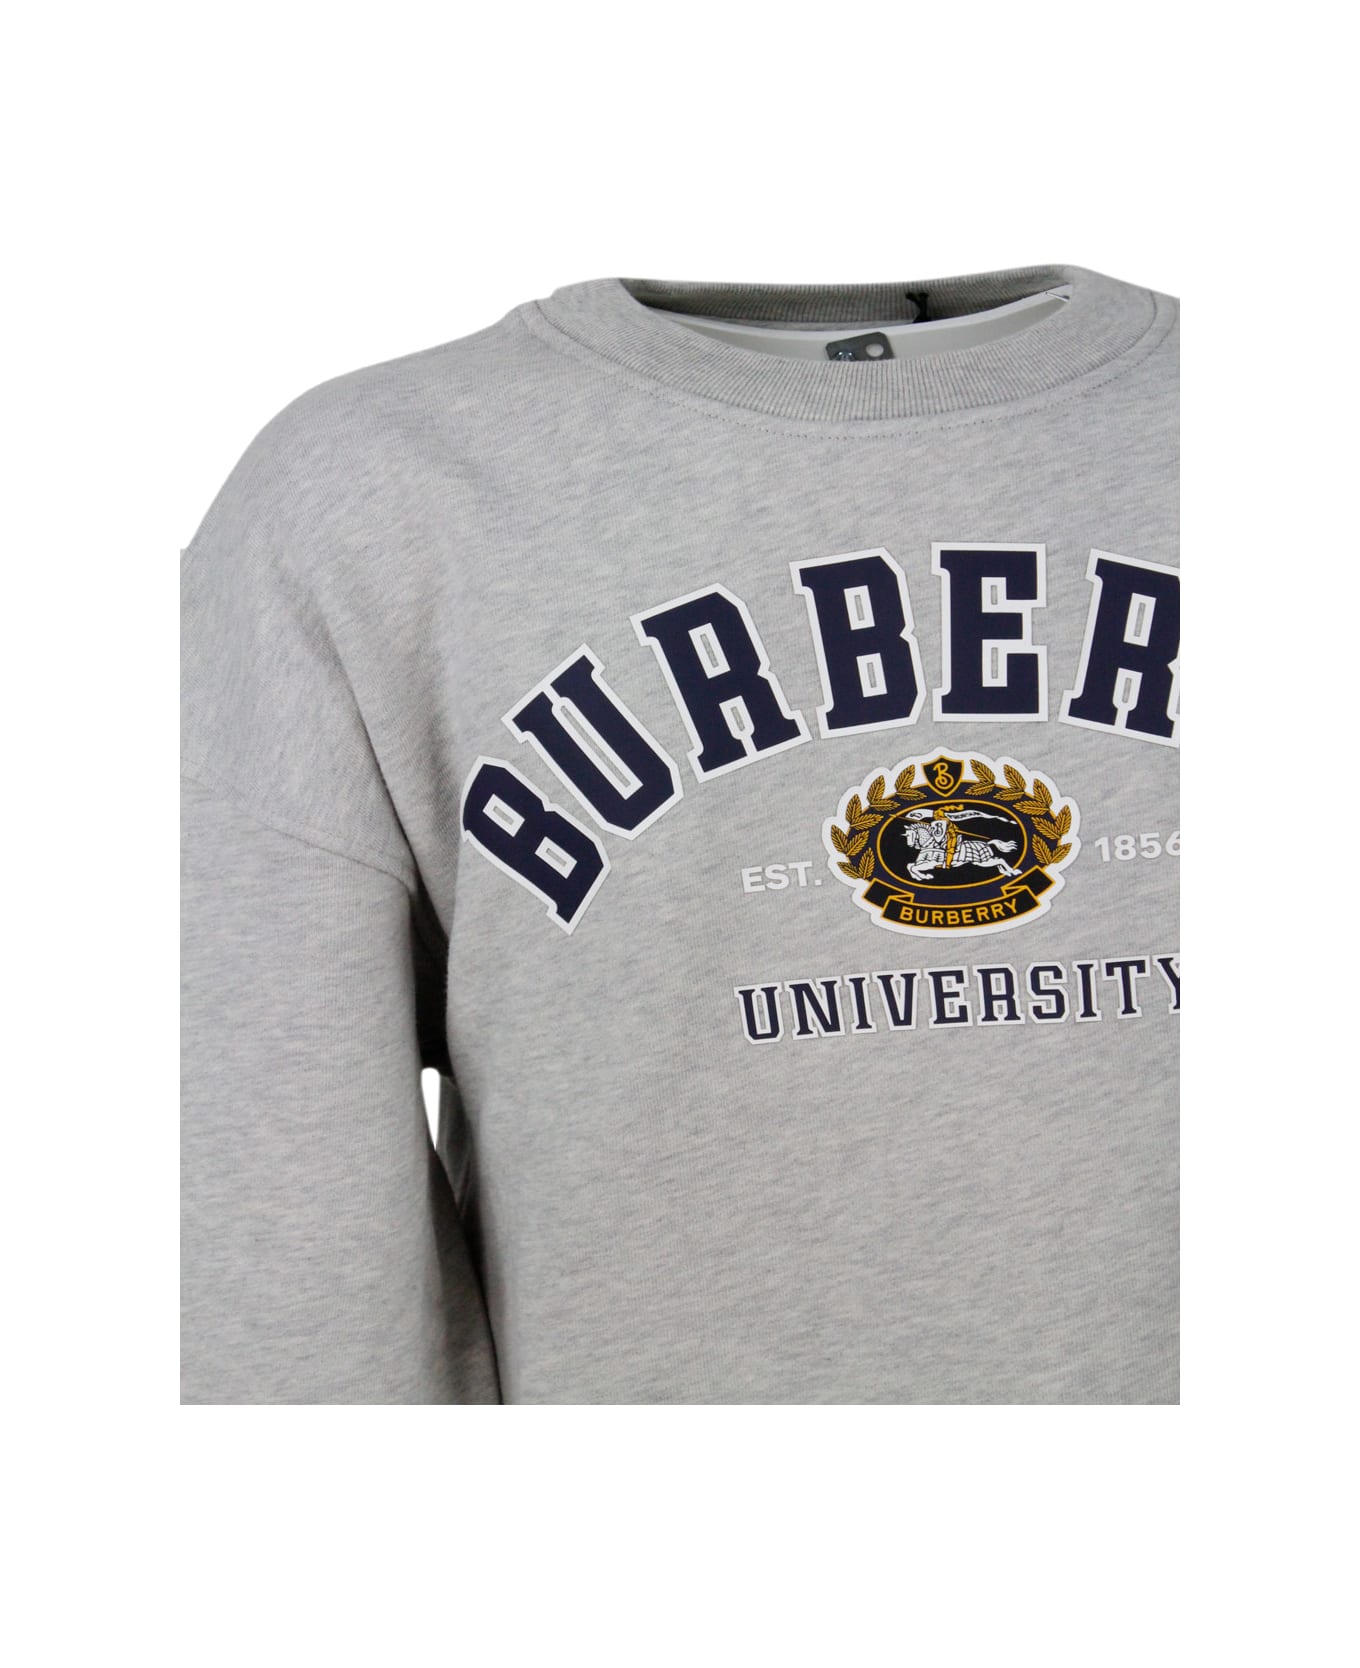 Burberry Crewneck Sweatshirt In Cotton Jersey With Logo Print And University Writing On The Front - Grey